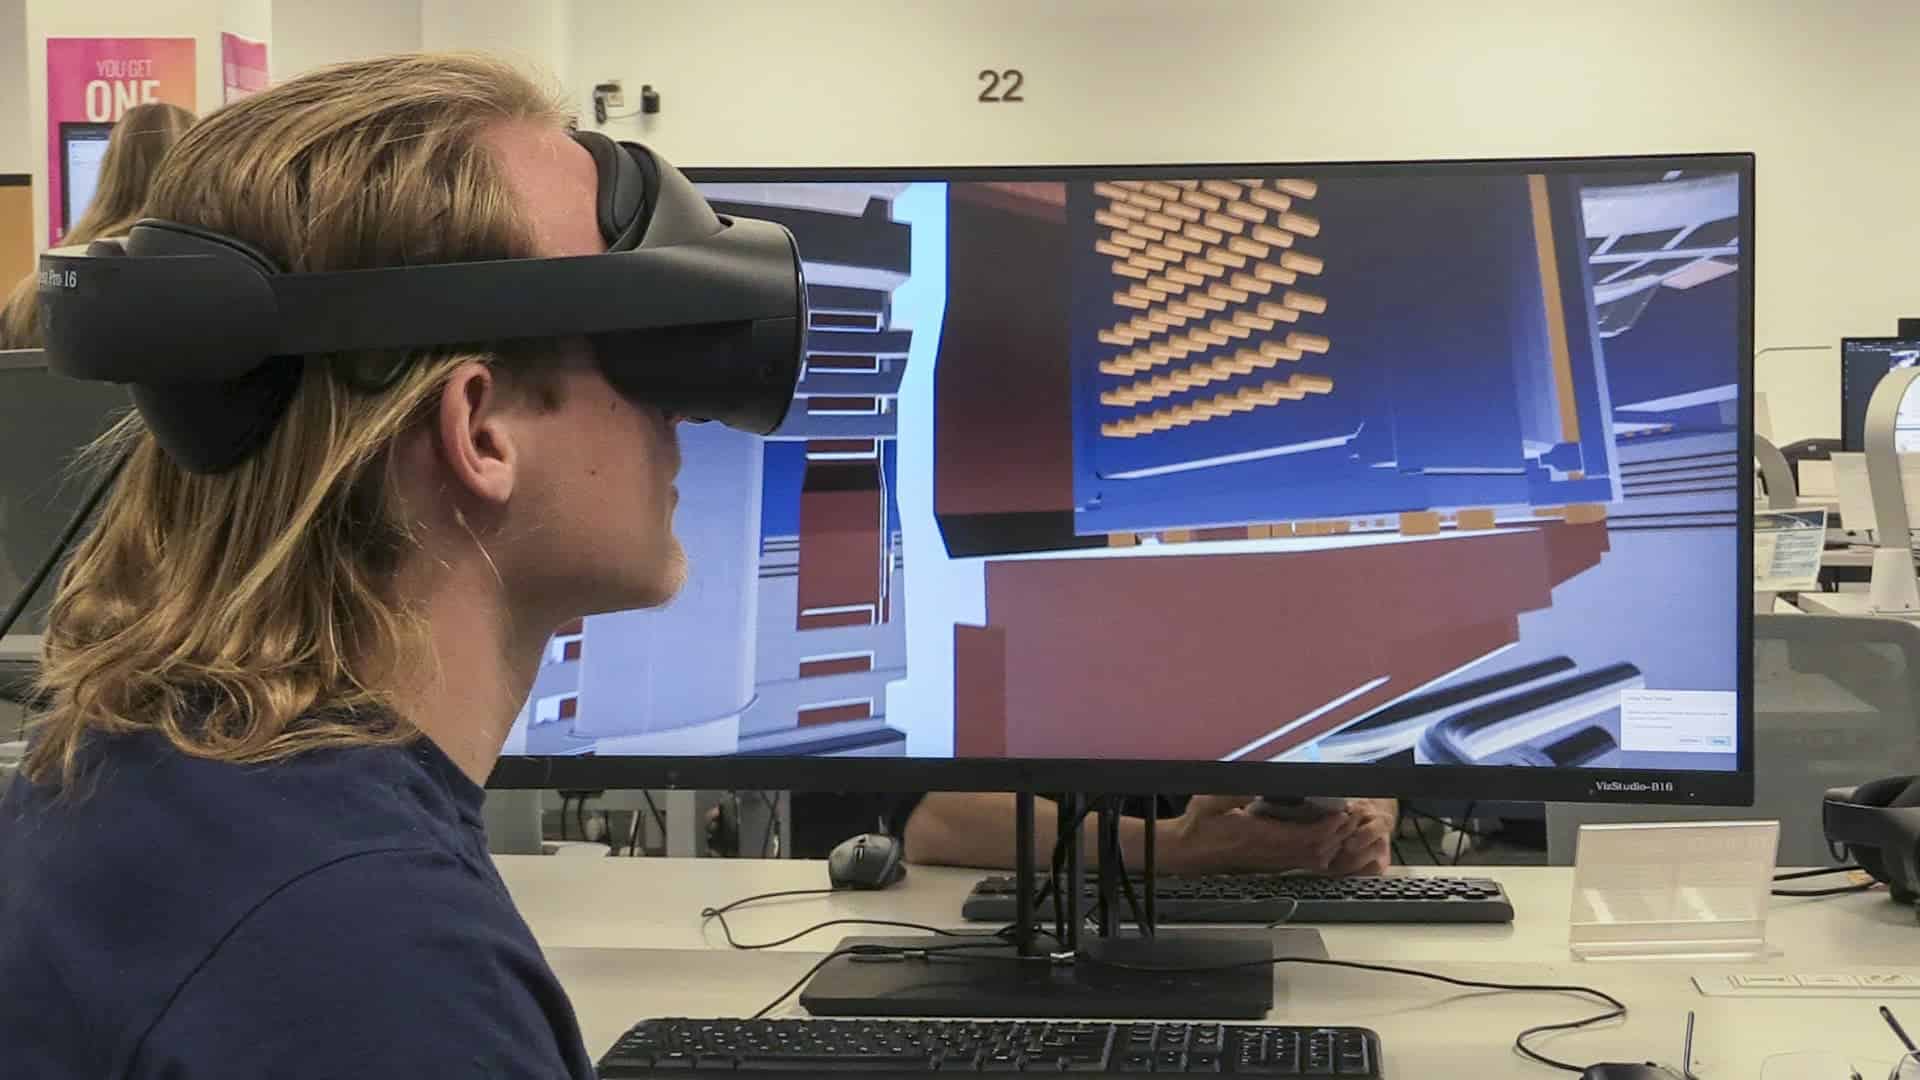 man using VR technology in front of a computer screen